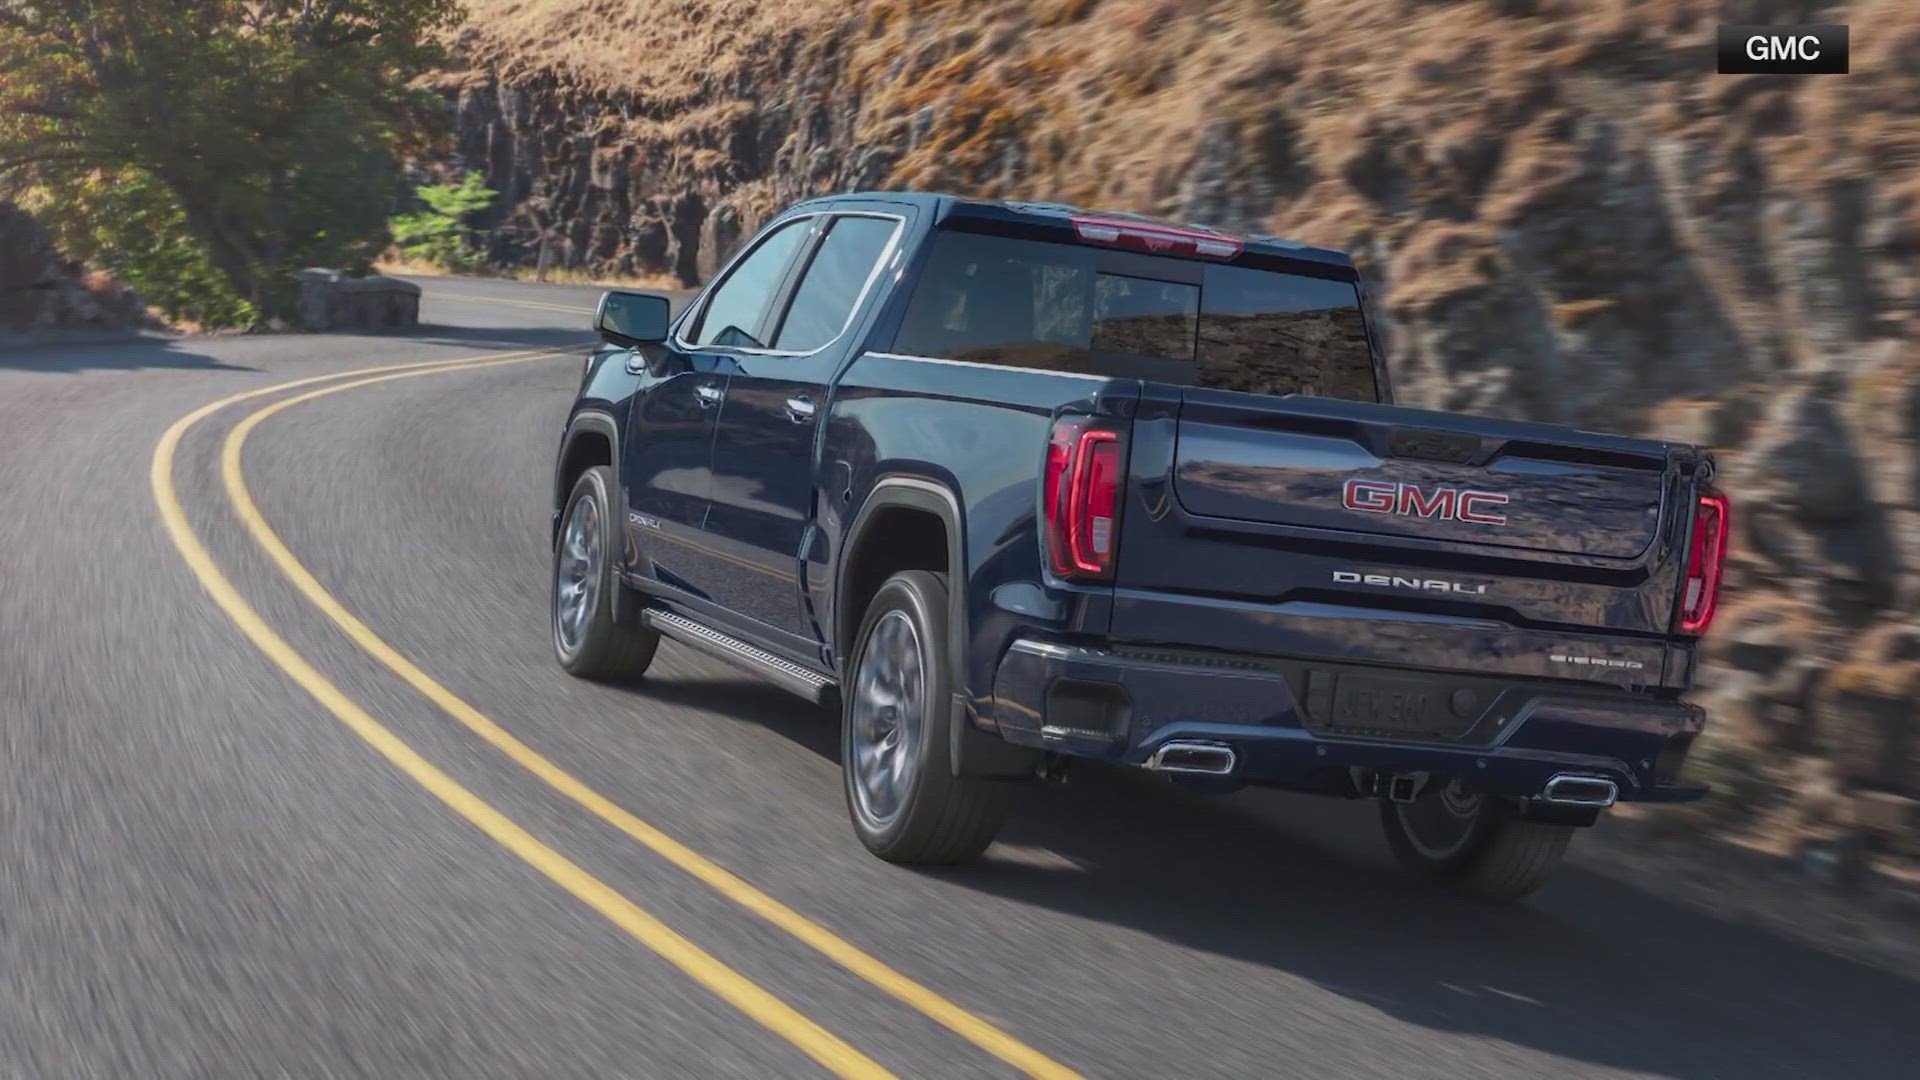 GM recall Some heavyduty pickup tailgates can open unexpectedly